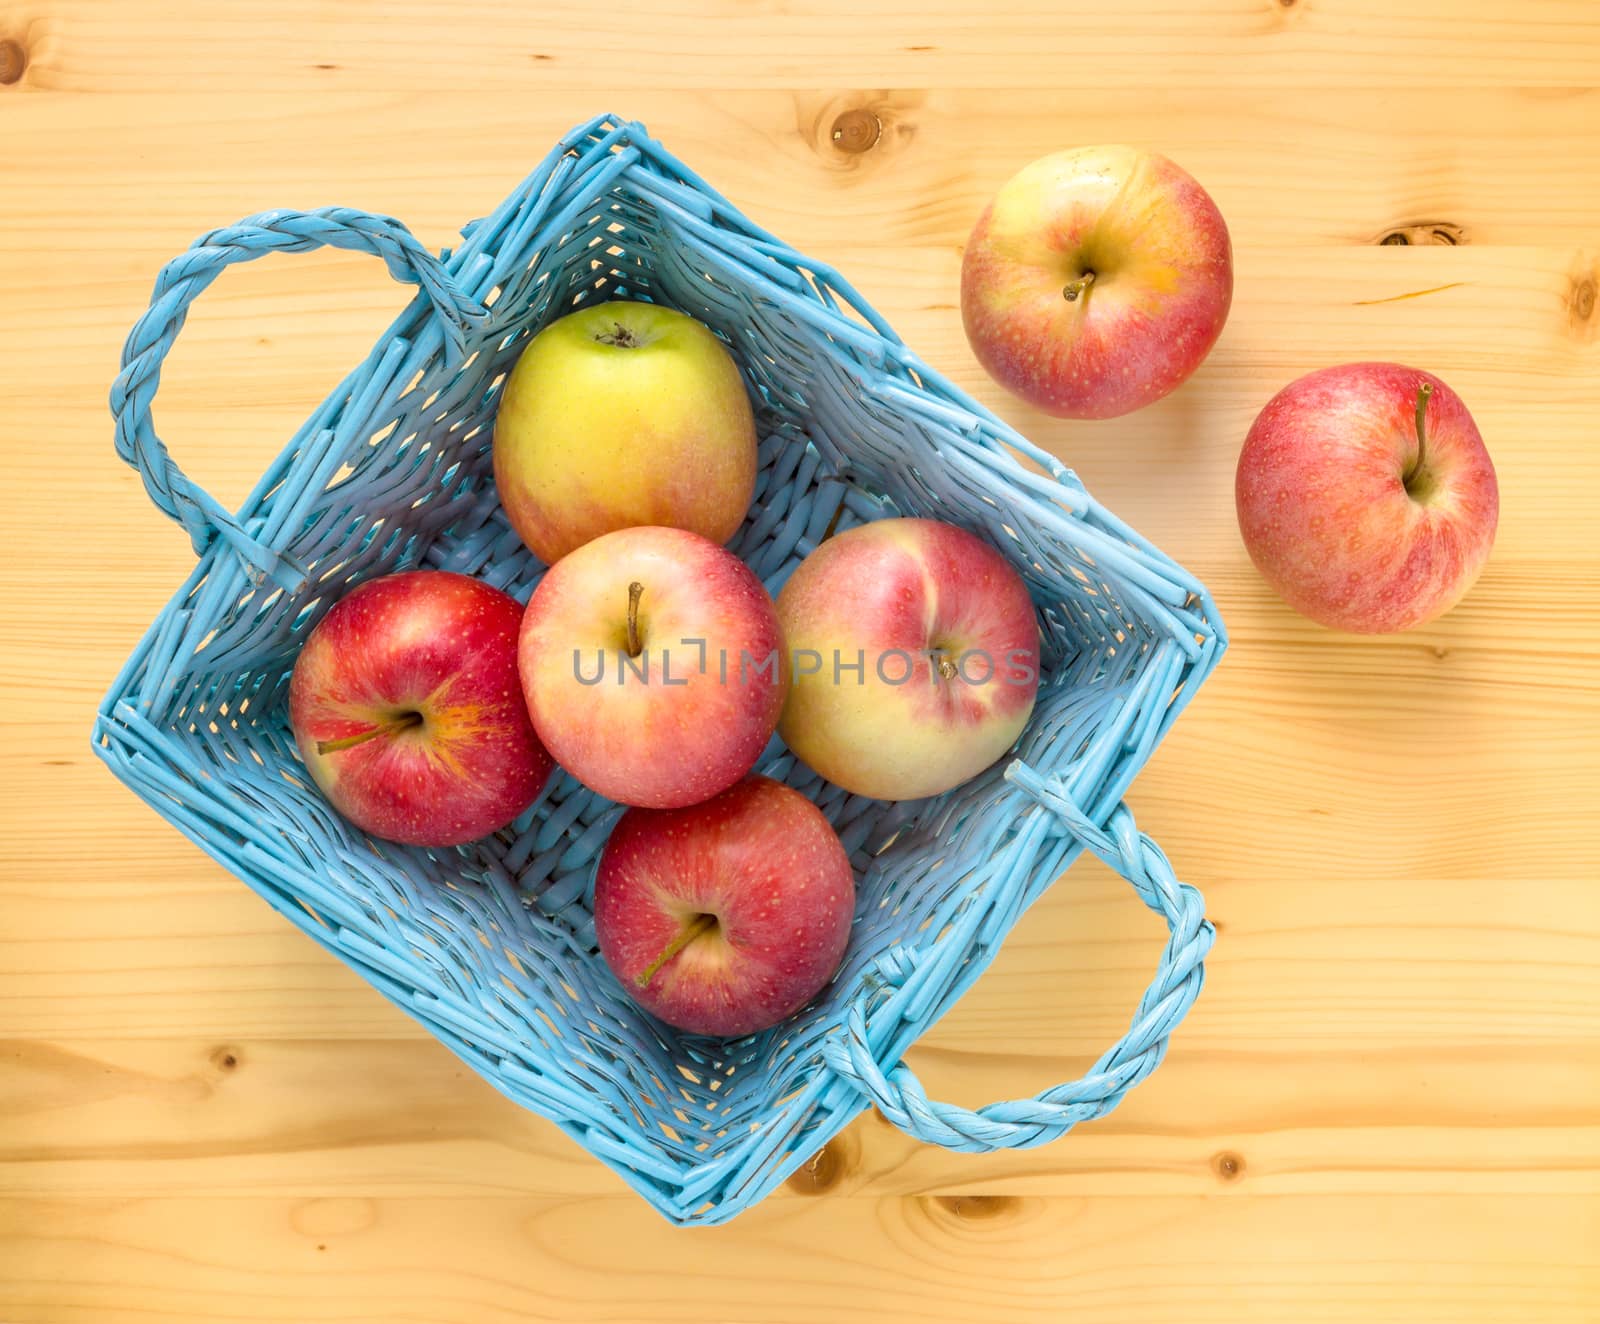 Red apples in blue wooden basket on wooden table. Two apples are remained out of the basket.Top view.